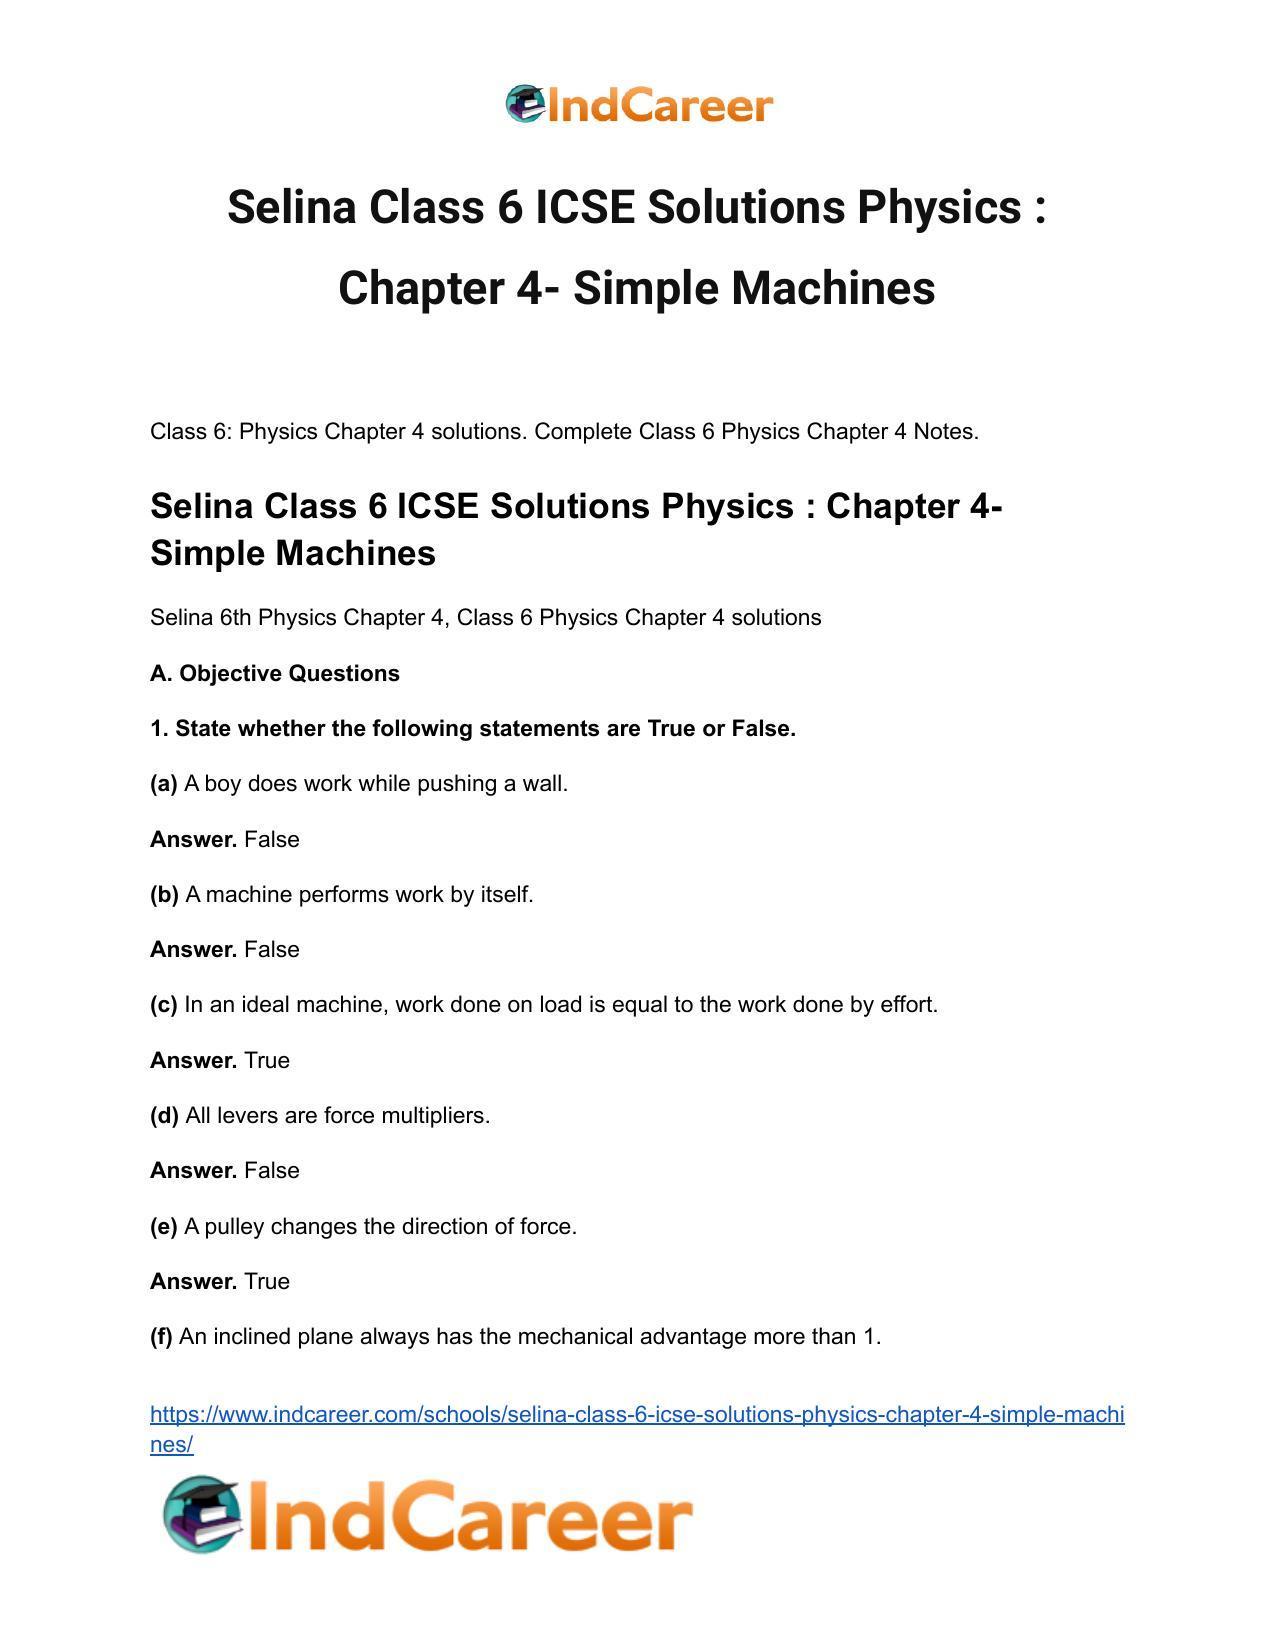 Selina Class 6 ICSE Solutions Physics : Chapter 4- Simple Machines - Page 2